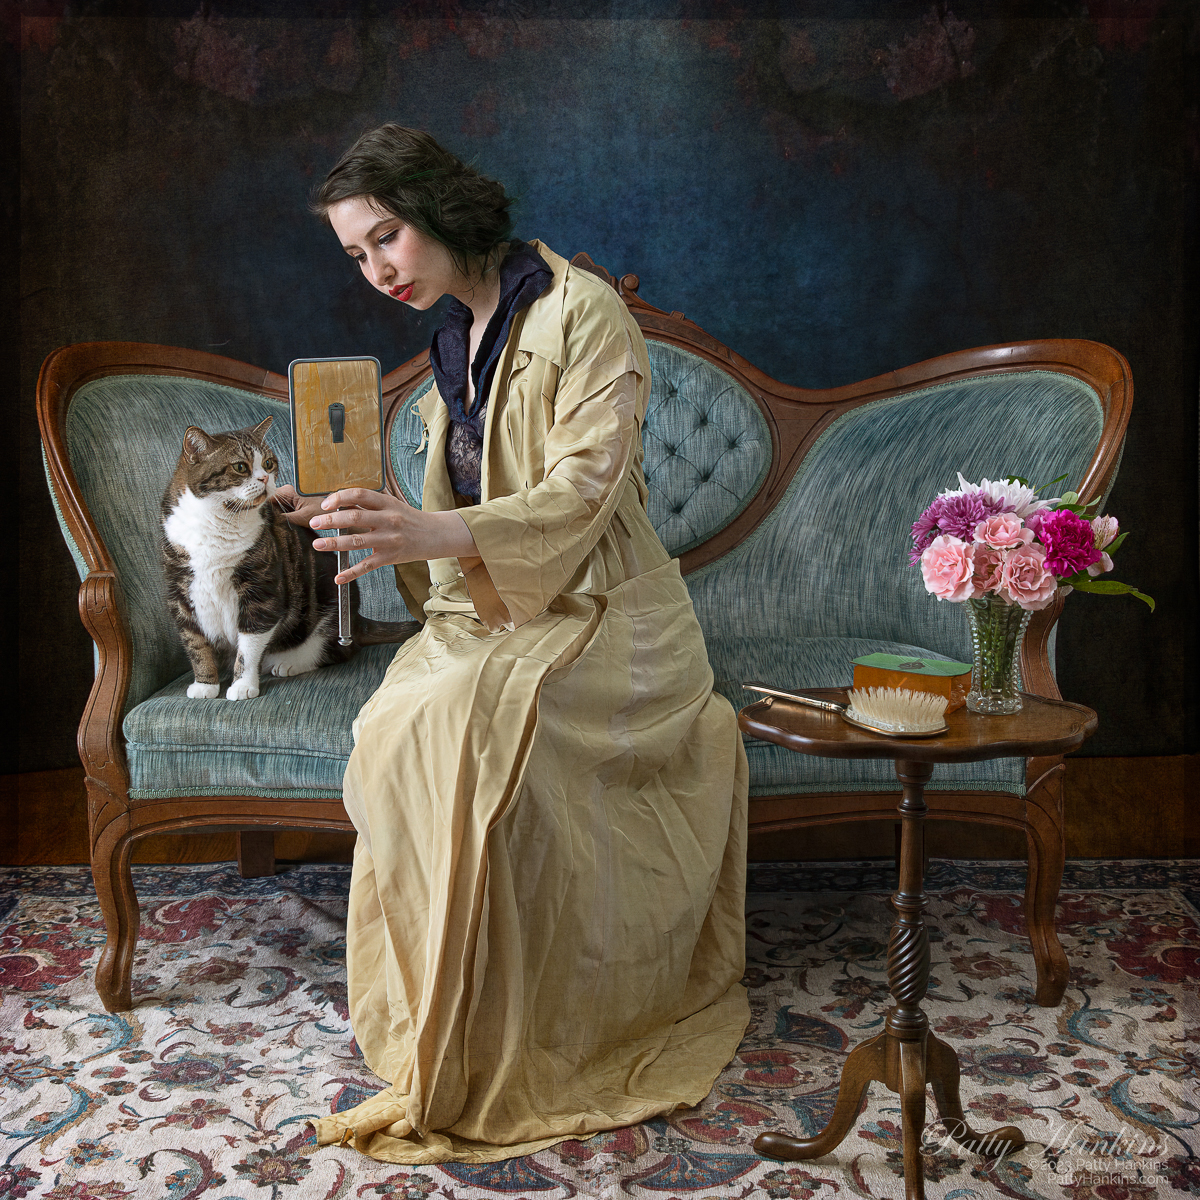 Woman sitting on a vintage sette holding a hand mirror so a brown and white tabby cat can look at himself in the mirror